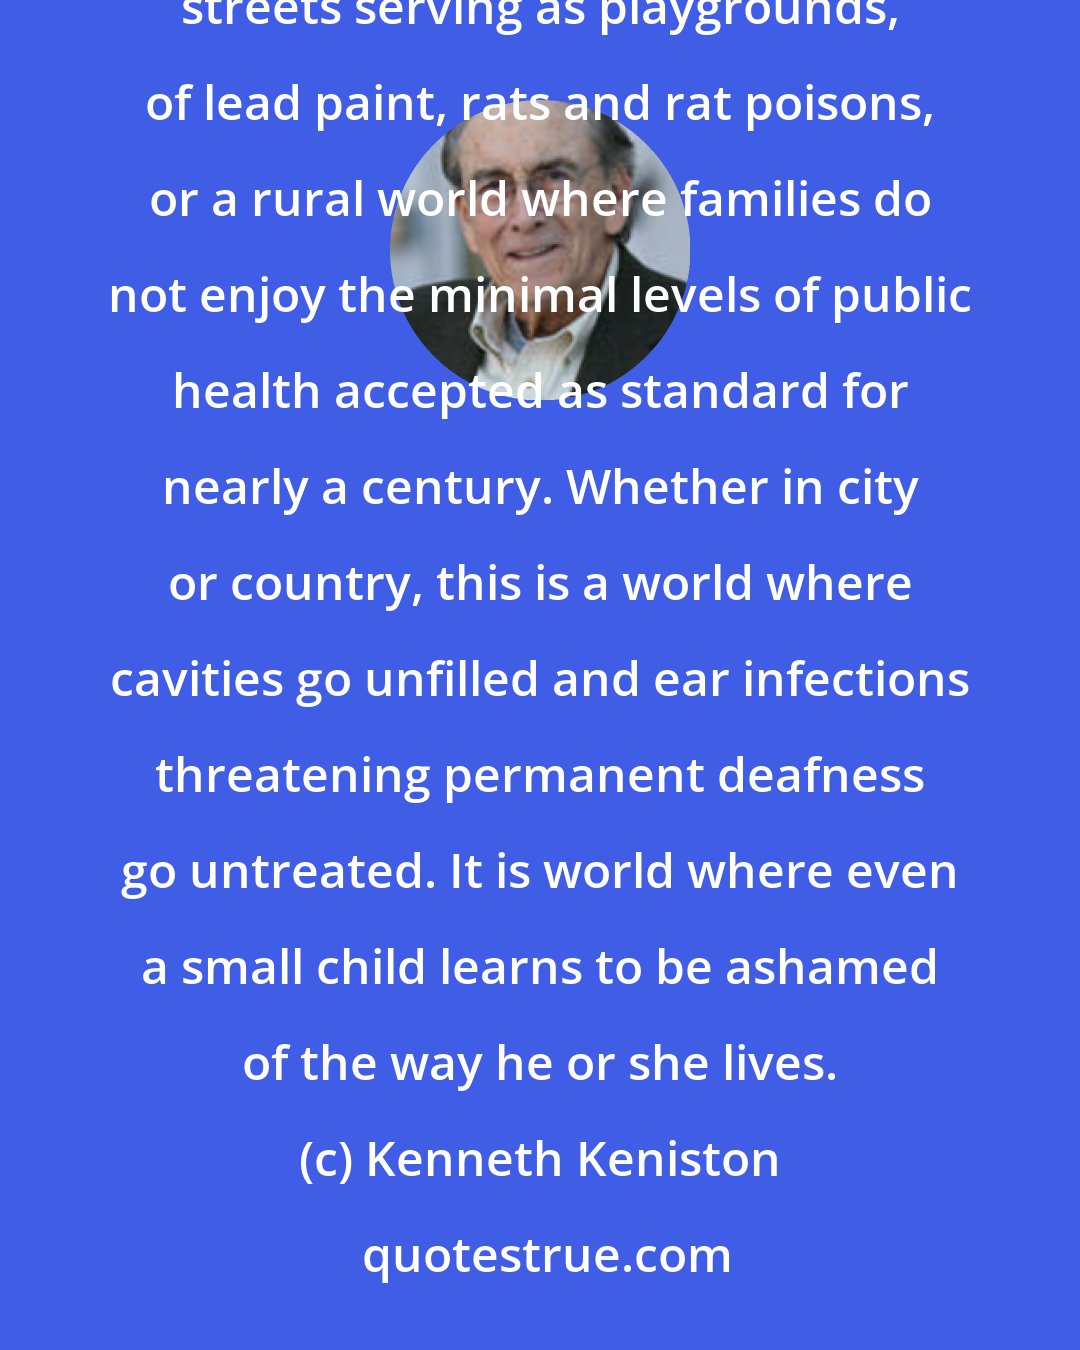 Kenneth Keniston: Poor children live in a particularly dangerous world--an urban world of broken stair railings, of busy streets serving as playgrounds, of lead paint, rats and rat poisons, or a rural world where families do not enjoy the minimal levels of public health accepted as standard for nearly a century. Whether in city or country, this is a world where cavities go unfilled and ear infections threatening permanent deafness go untreated. It is world where even a small child learns to be ashamed of the way he or she lives.